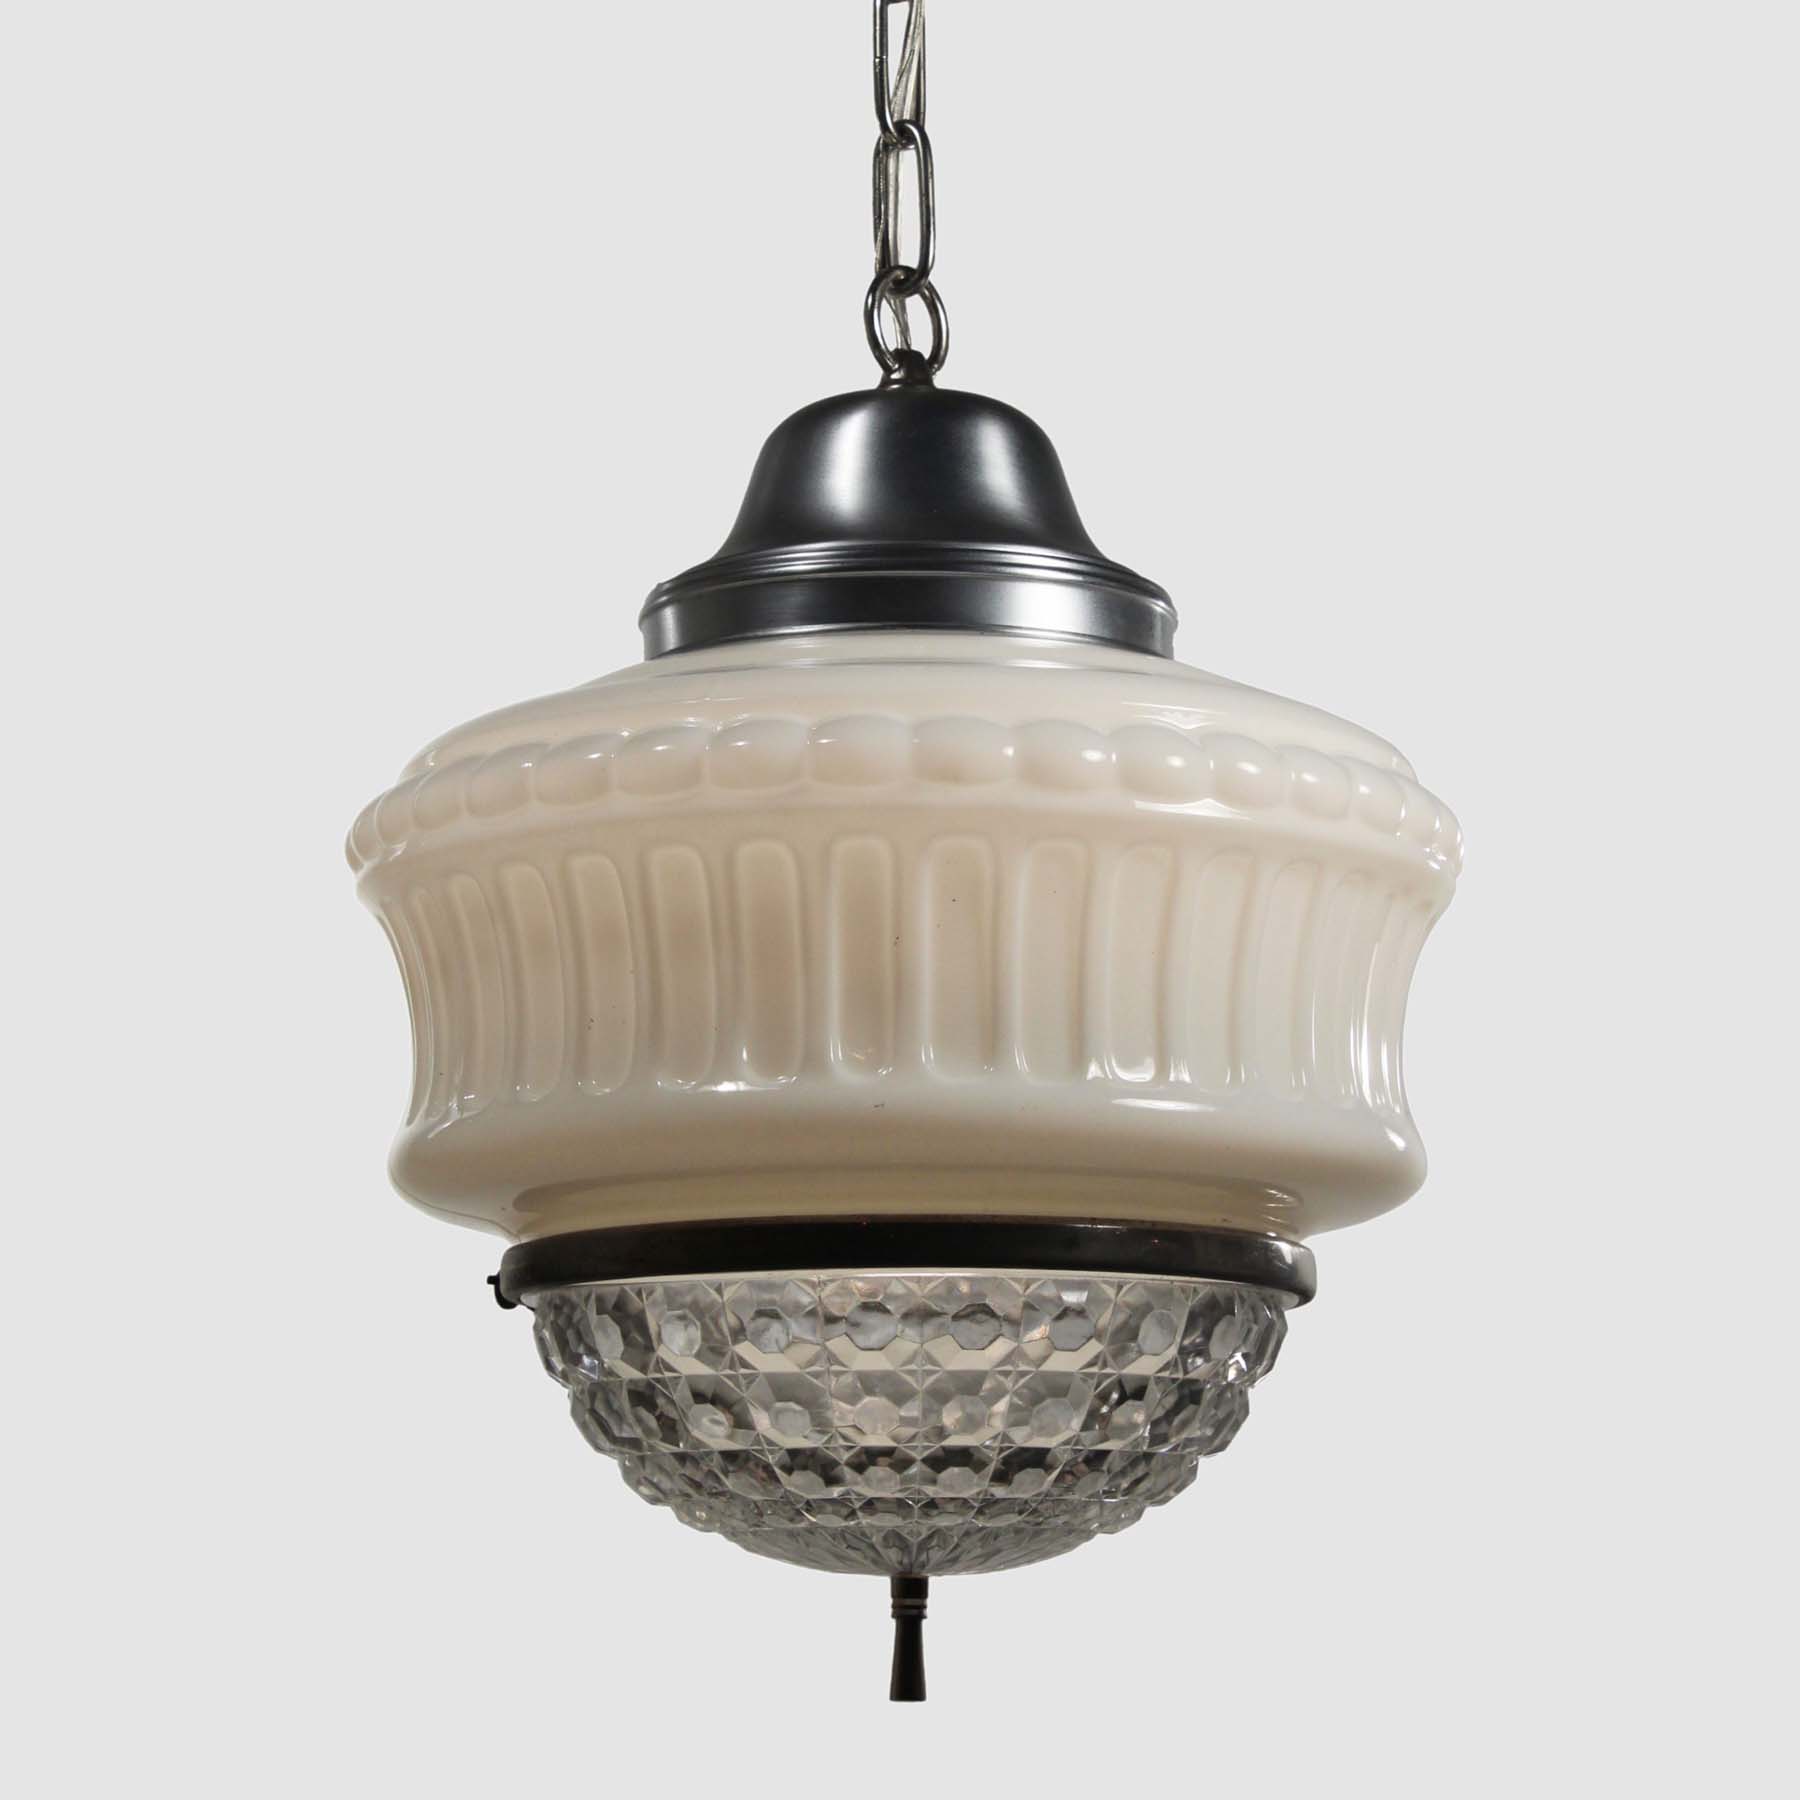 SOLD Unusual Antique Pendant Light with Two-Part Prismatic Shade-66863